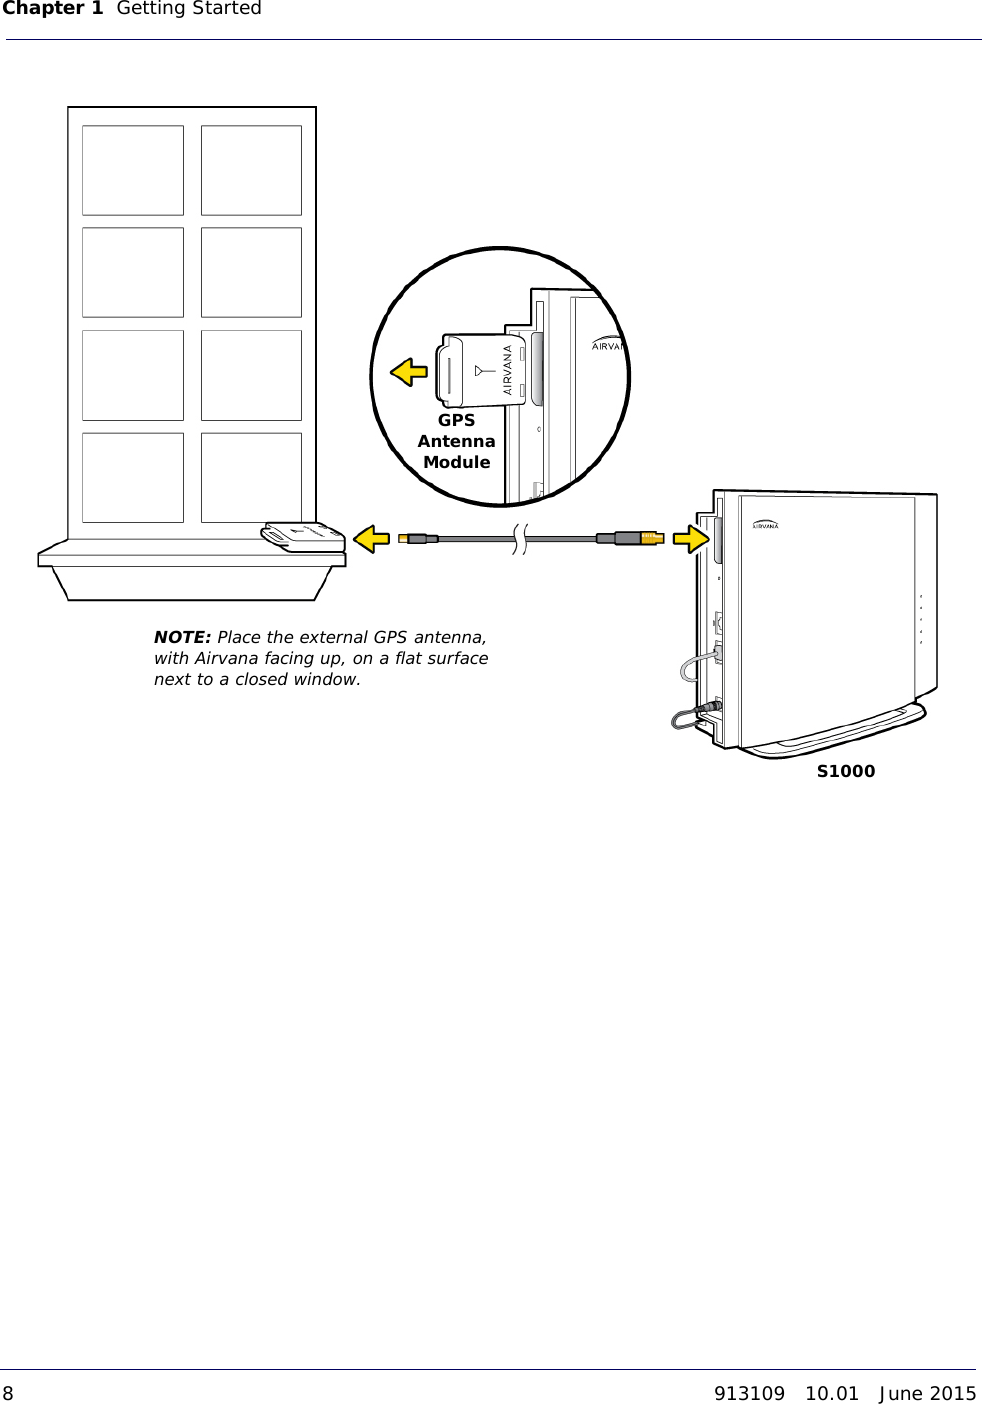 S1000GPS Antenna ModuleNOTE: Place the external GPS antenna, with Airvana facing up, on a flat surface next to a closed window.Chapter 1   Getting Started 8913109   10.01   June 2015DRAFT